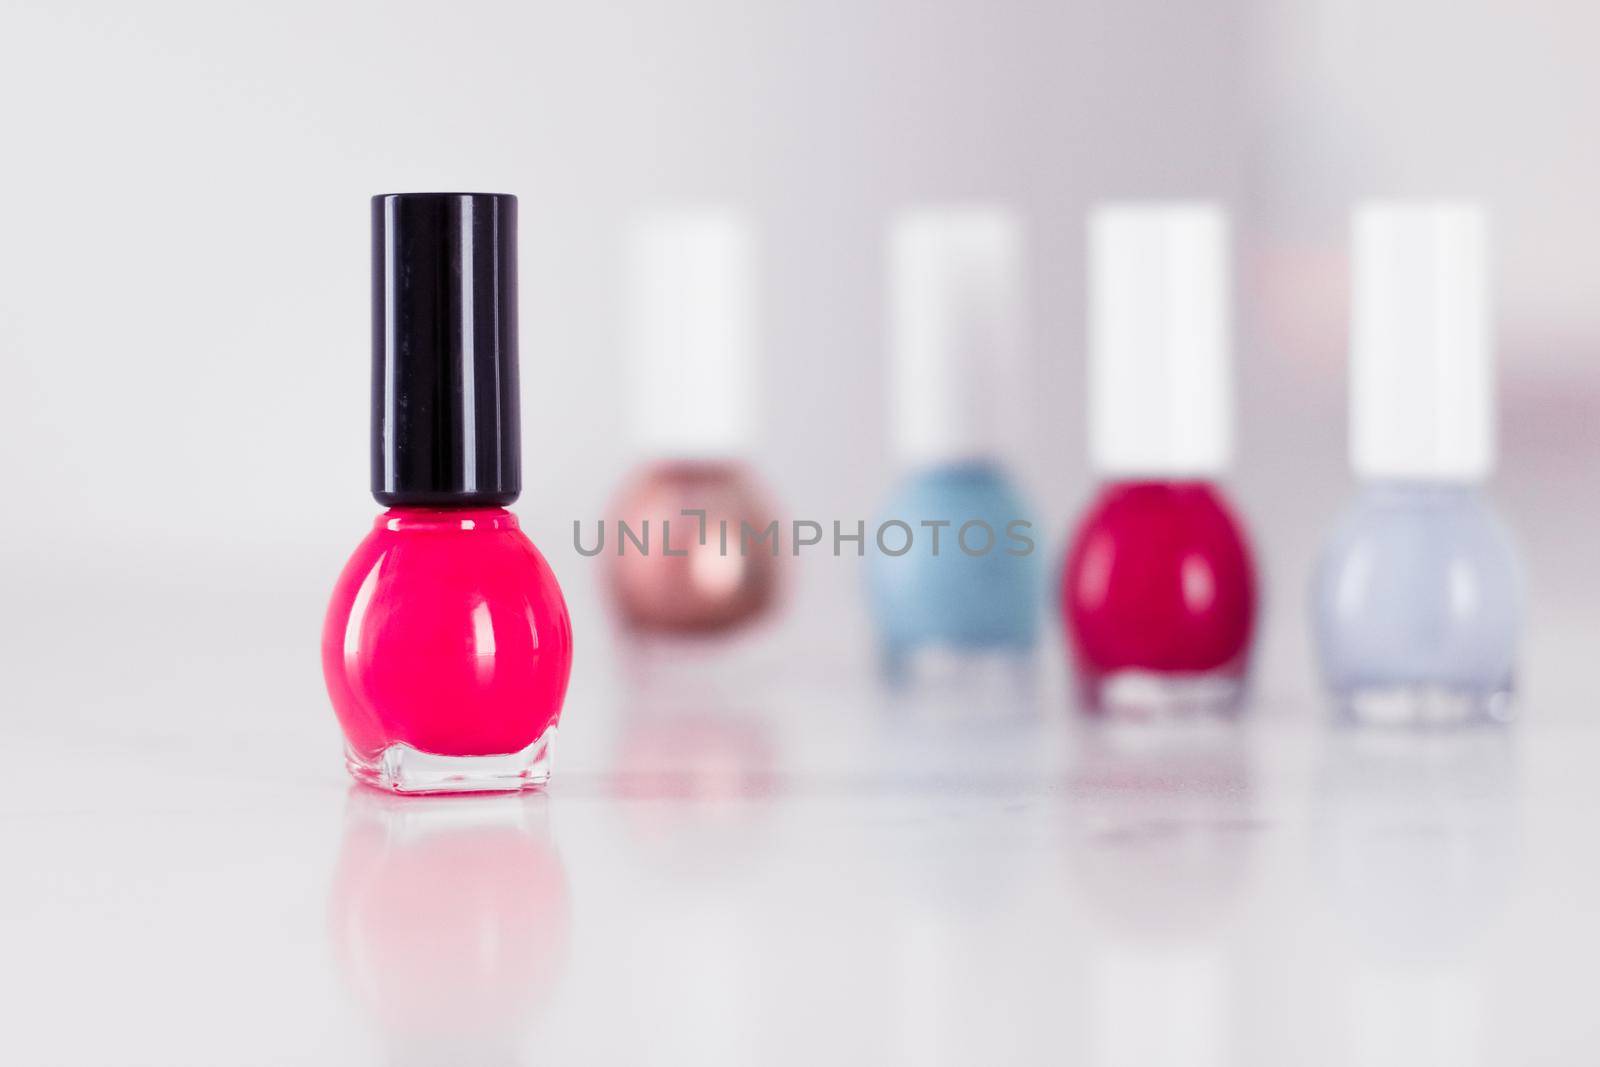 Nail polish bottles, manicure and pedicure collection by Anneleven